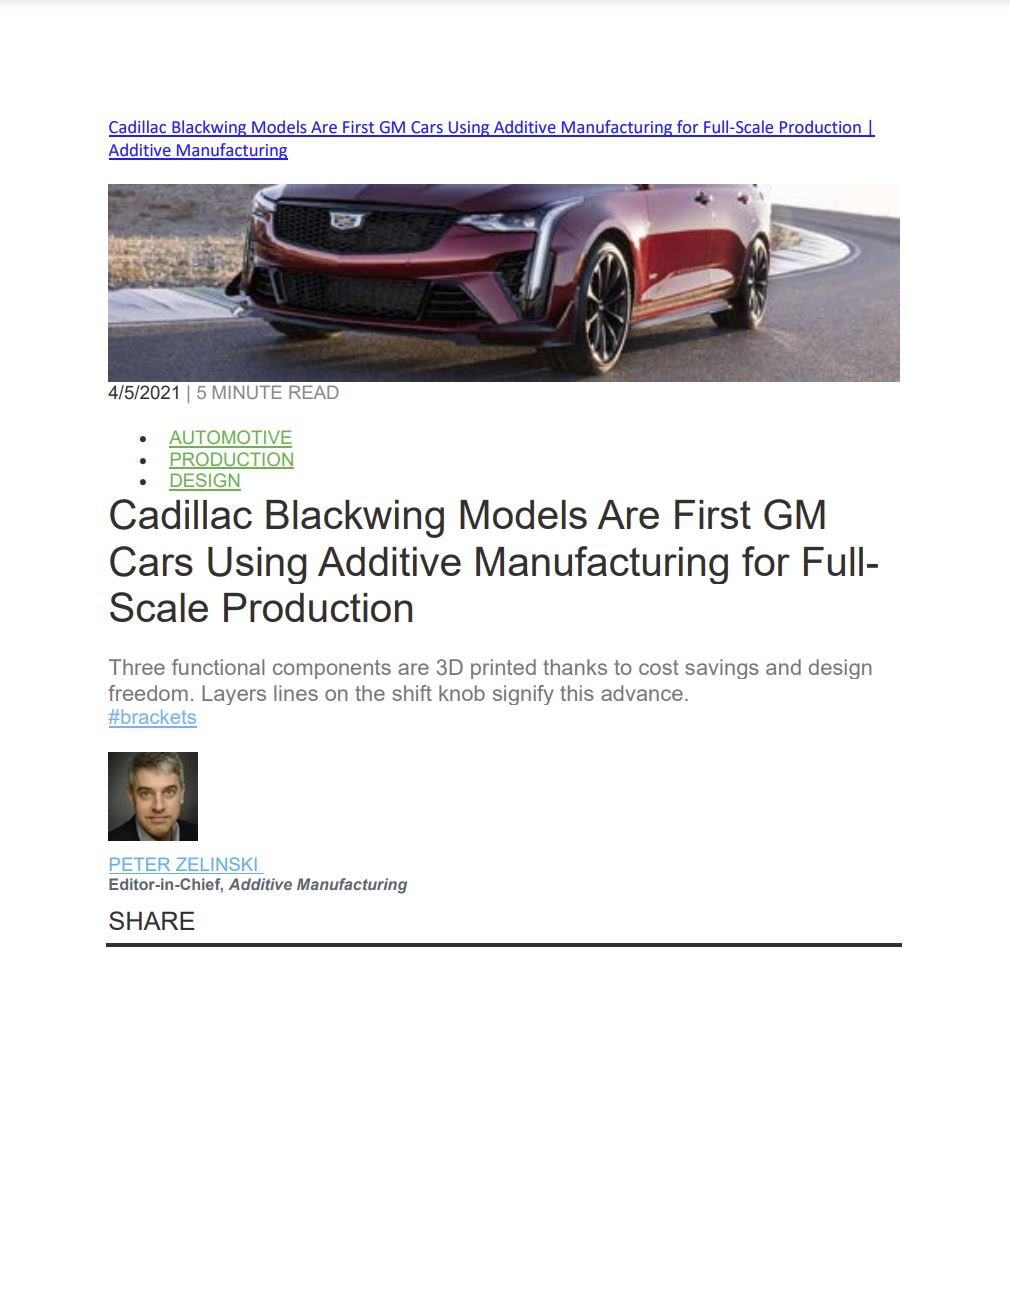 Cadillac Blackwing Models are First GM Cars Using AM for Production